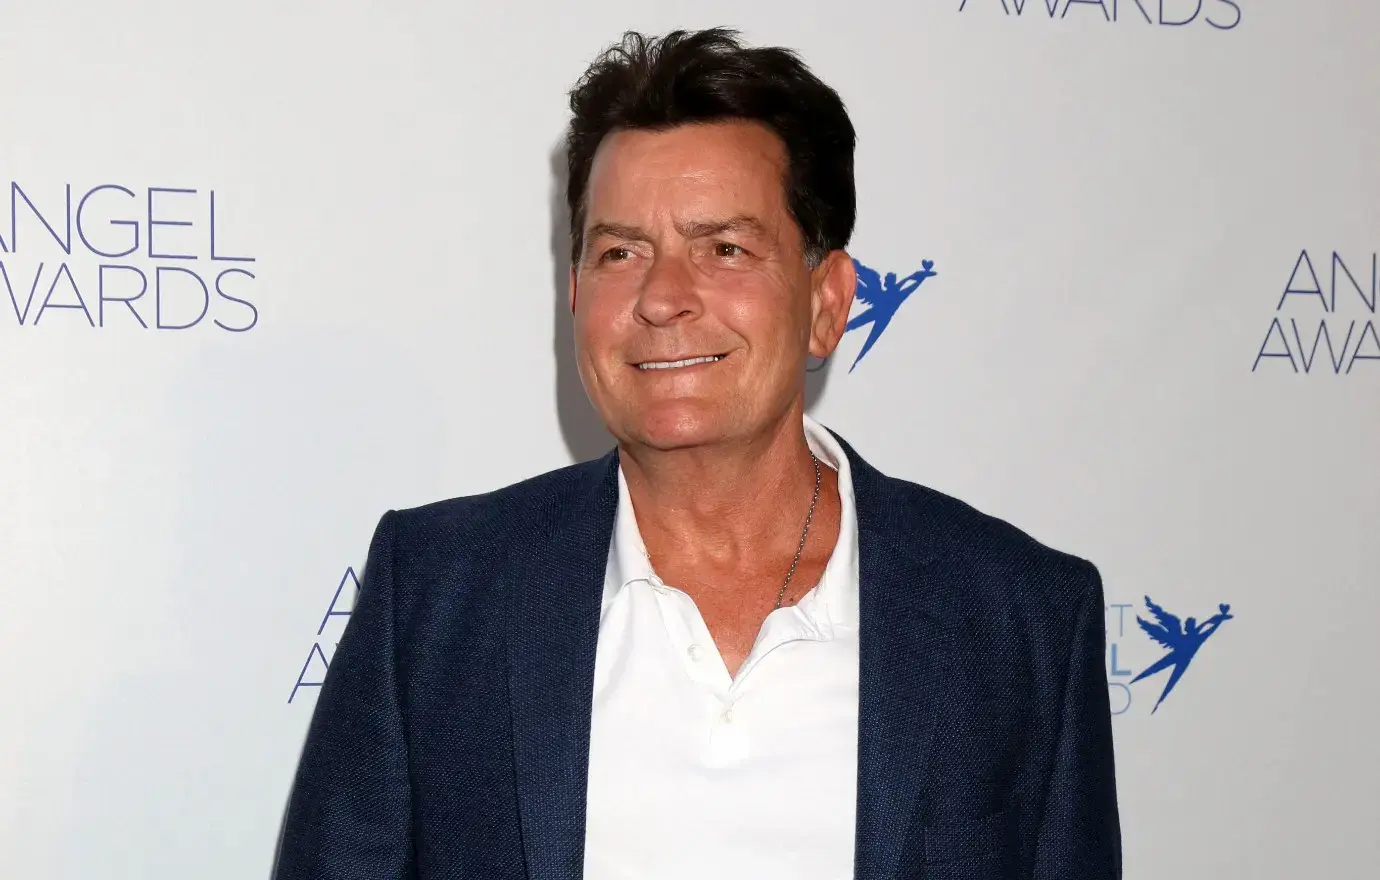 Charlie Sheen's Unease: Daughter Sami's Dive into OnlyFans Sparks Family Drama